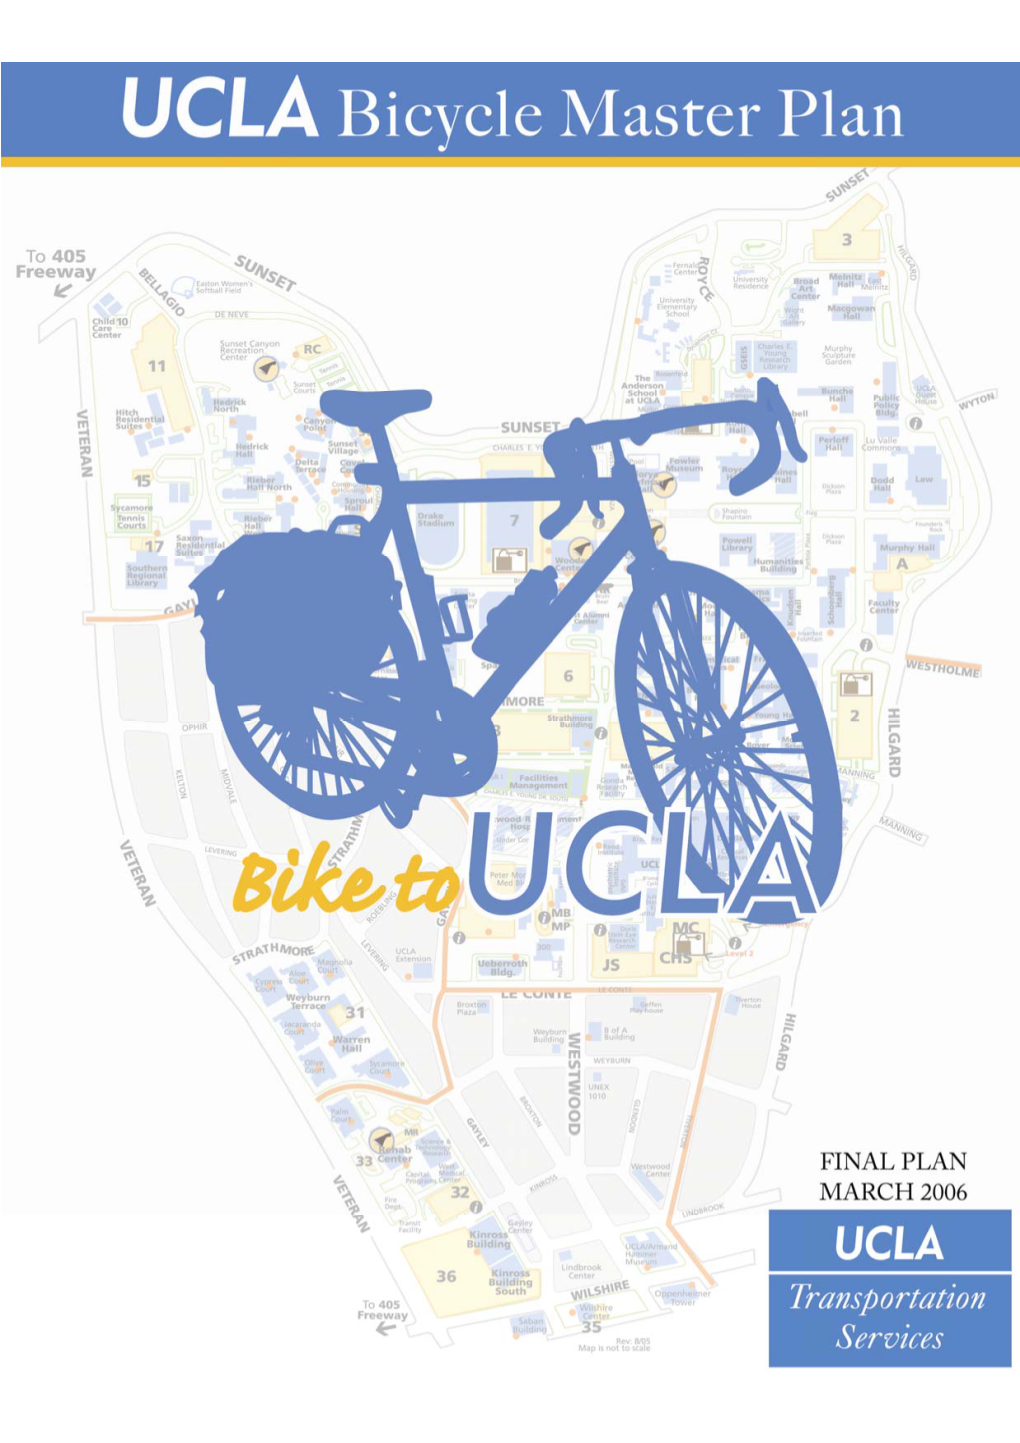 UCLA Bicycle Master Plan by Providing Valuable Input, Comments and Review of the Document